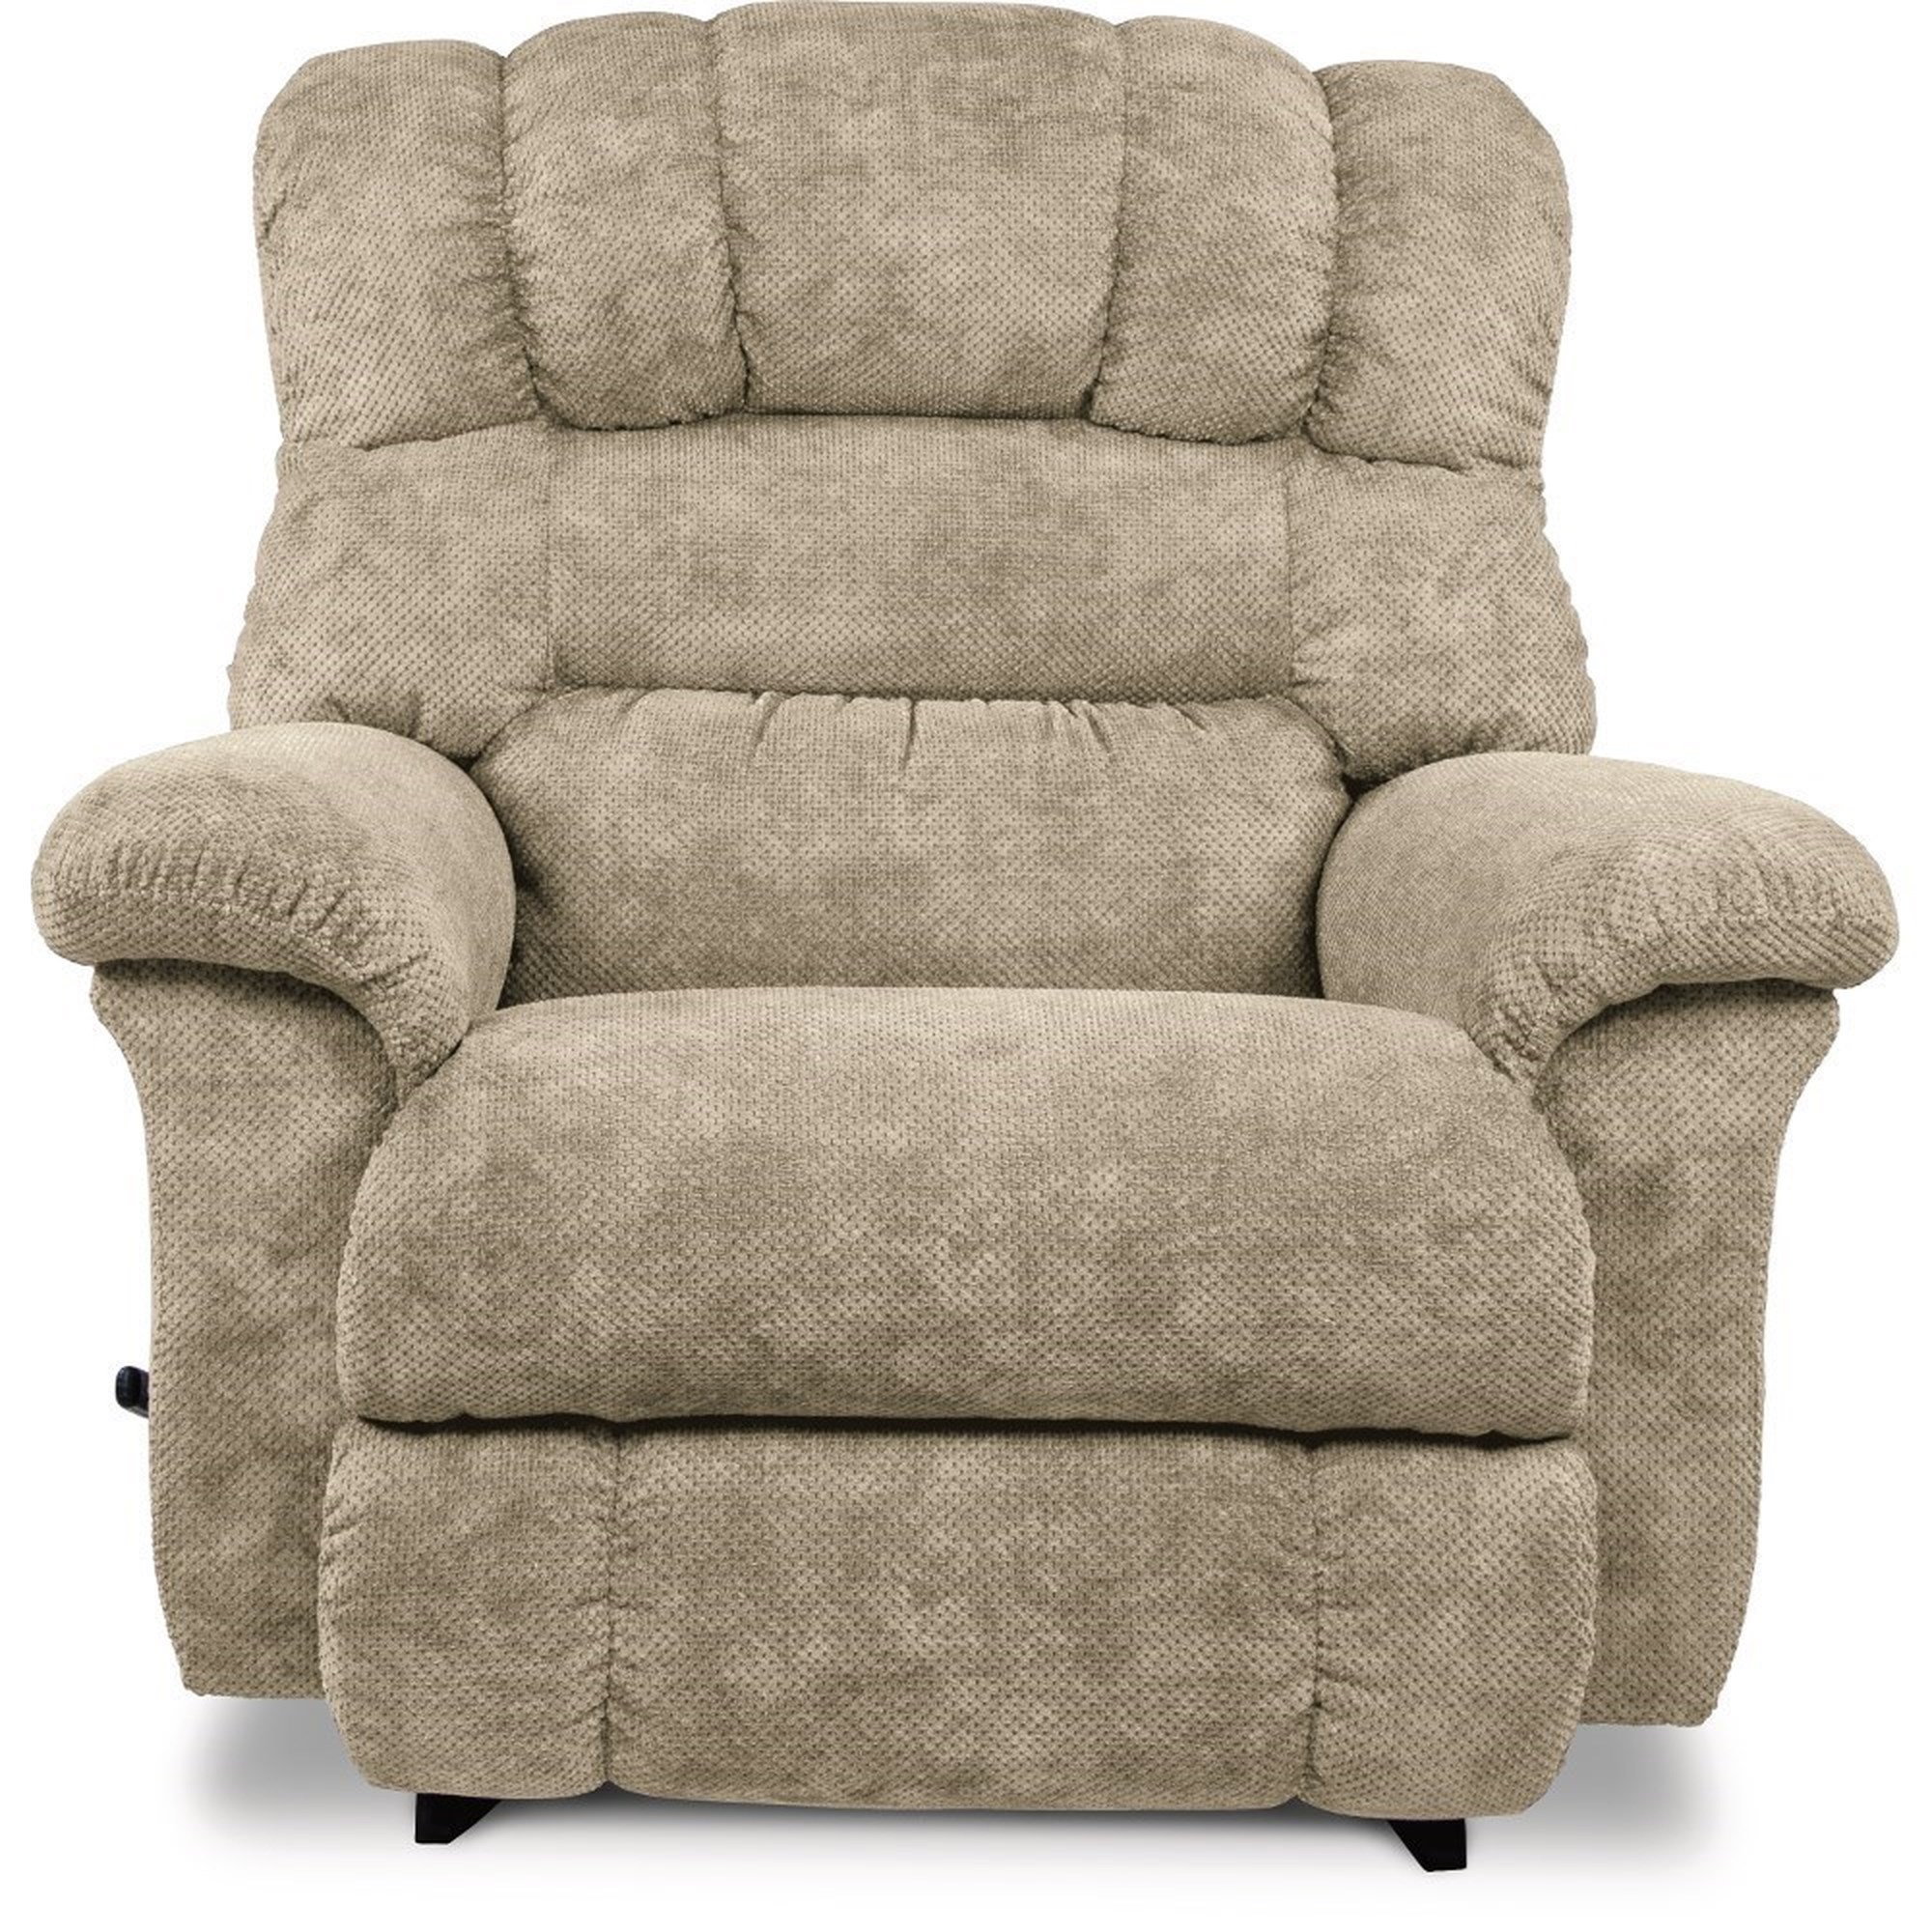 Alternating Pressure Recliner Cushion - Fits Lazy Boy and Lift